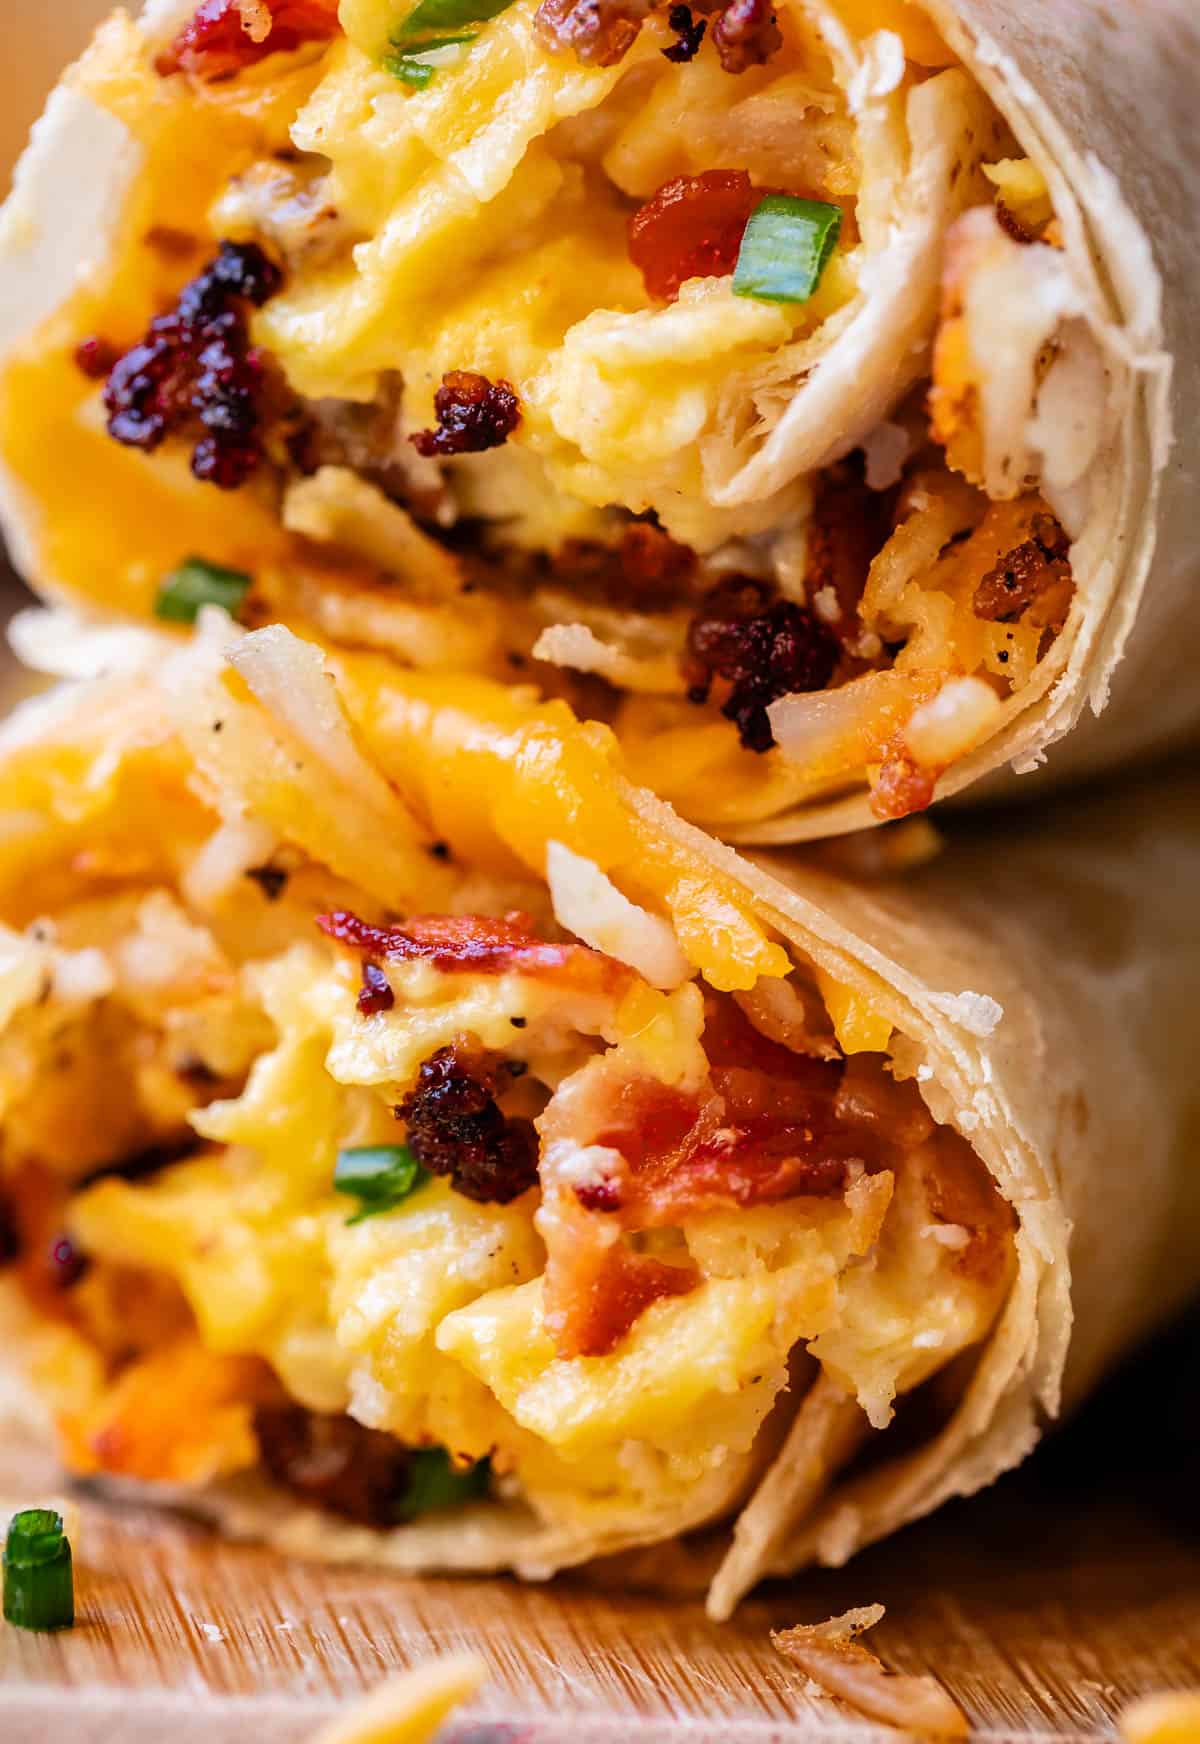 two breakfast burritos stacked on top of each other with cheese.